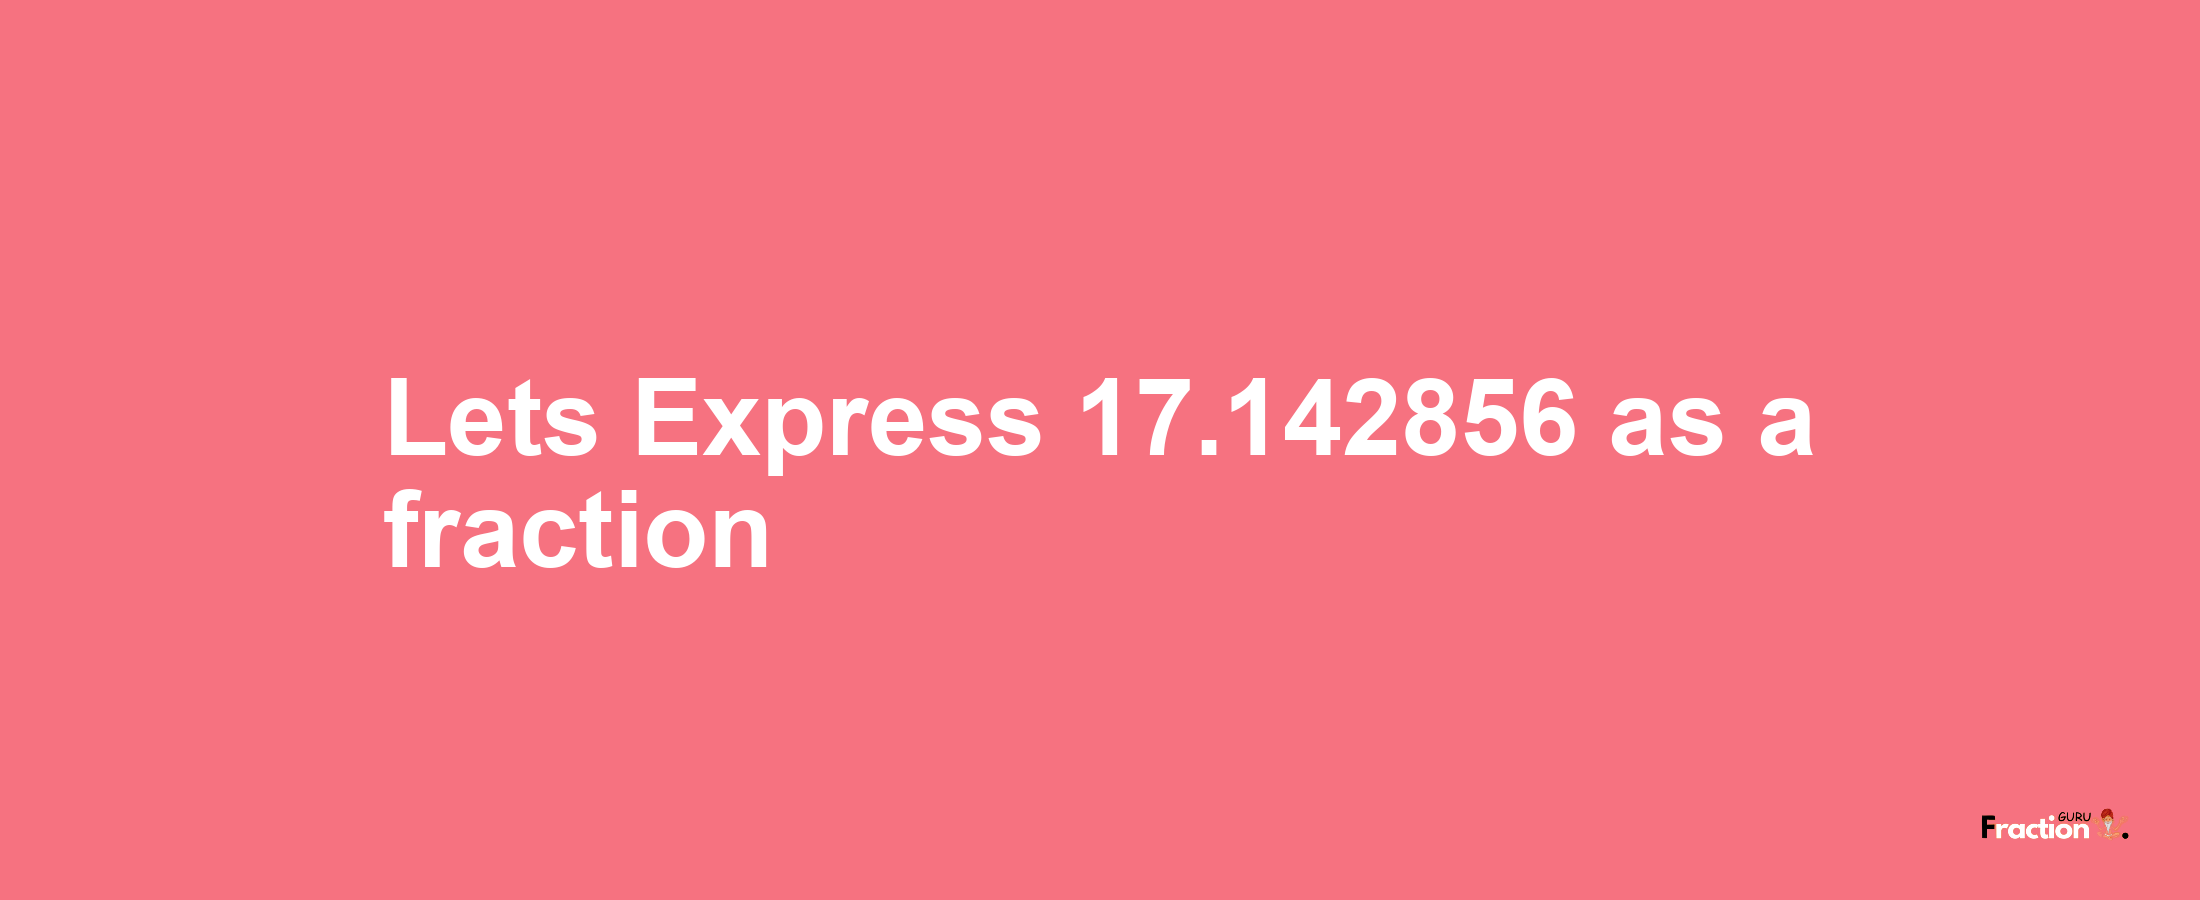 Lets Express 17.142856 as afraction